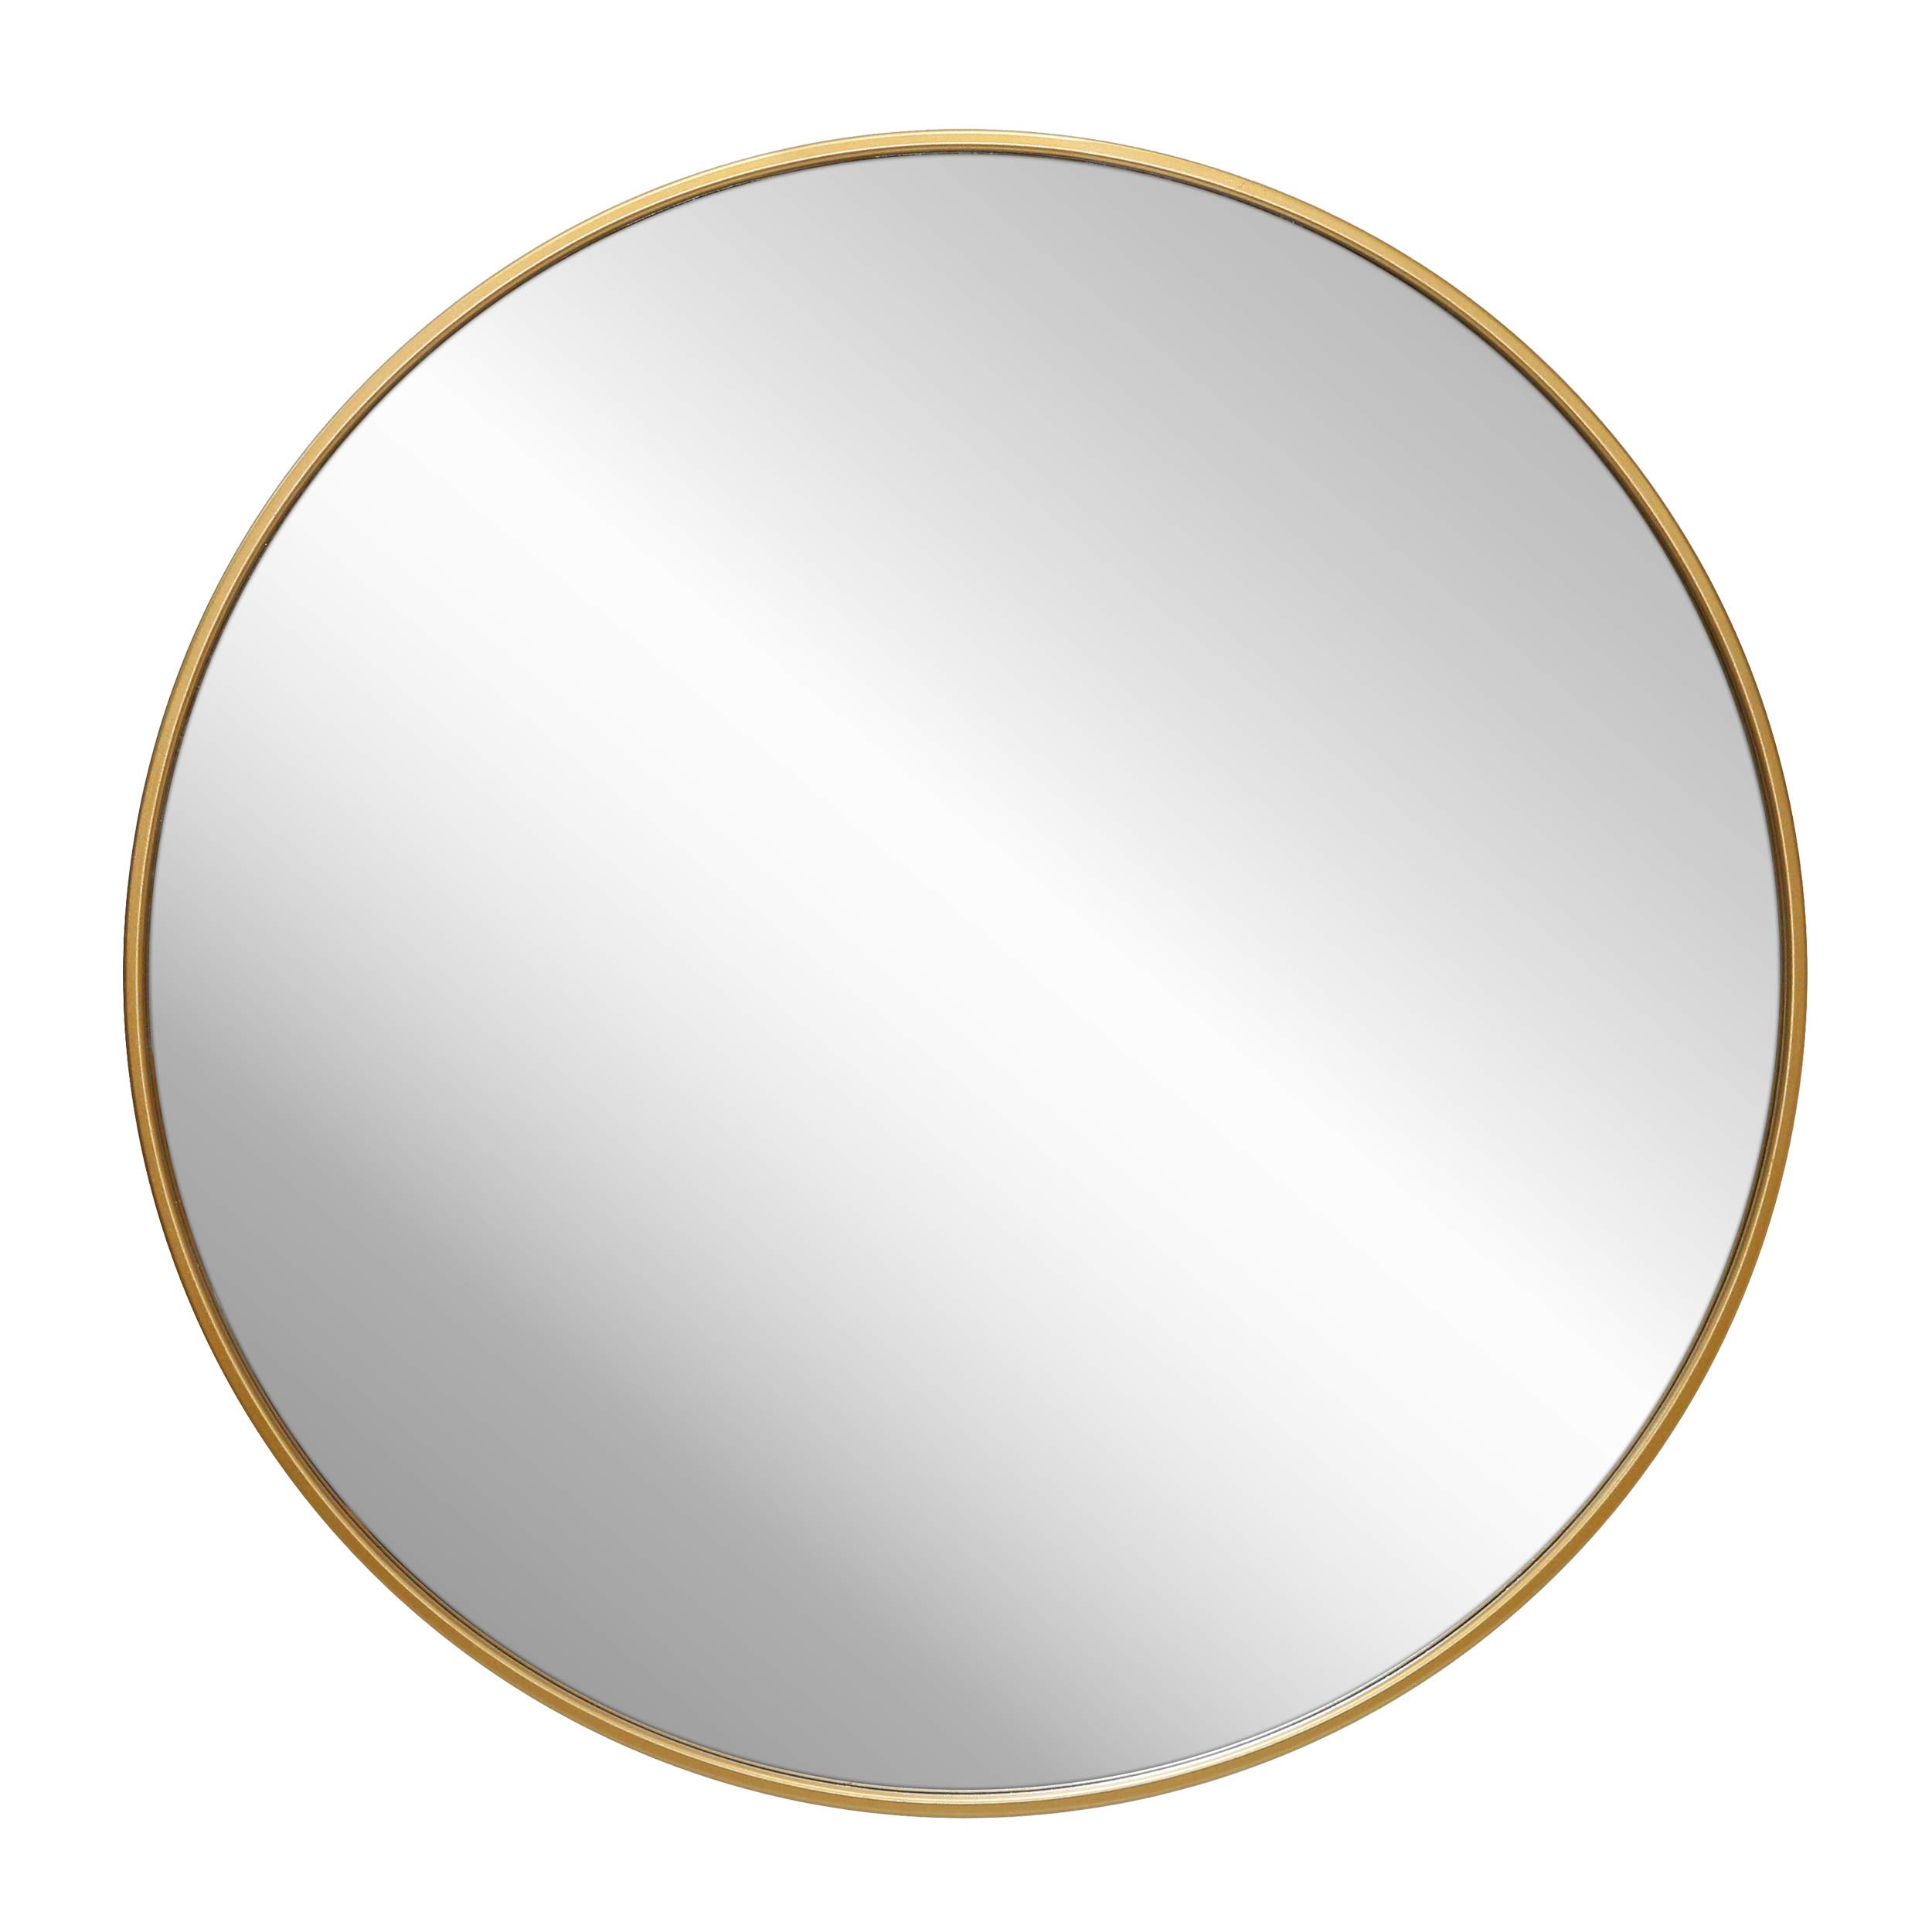 Gold Circle Wall Mirror 30 Inch Round Wall Mirror for Entryways, Washrooms, Living Rooms and More (Gold, 30")